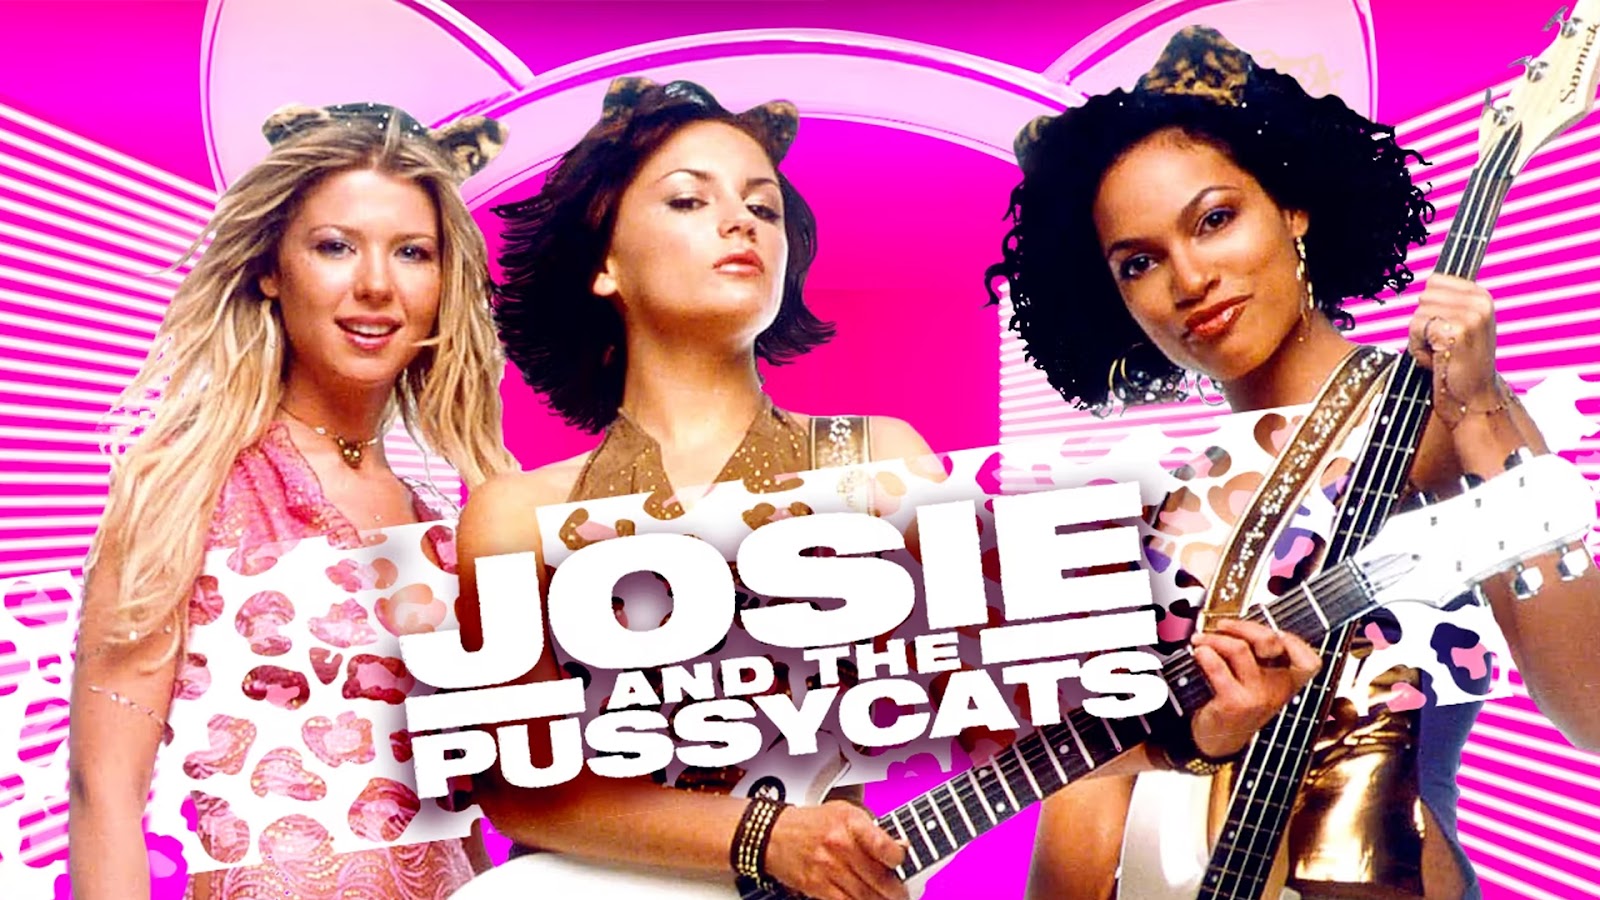 Episode 655: Josie and the Pussycats (2001)